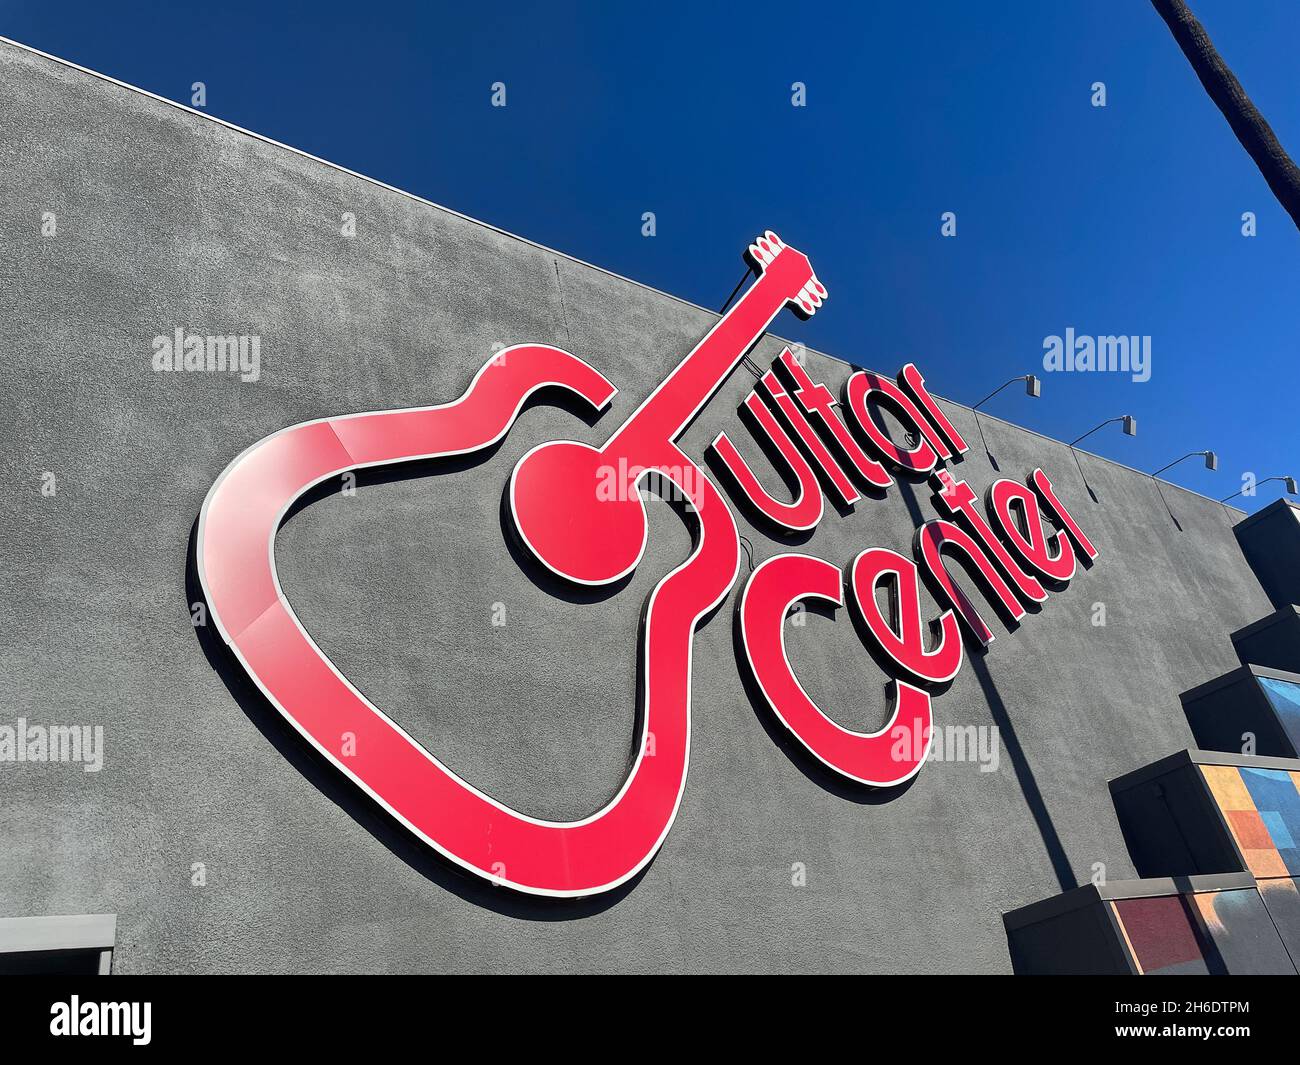 Los Angeles, CA, USA - November 14, 2021: Exterior of Guitar Center on Sunset Boulevard in Los Angeles, California. Guitar Center is an American music Stock Photo